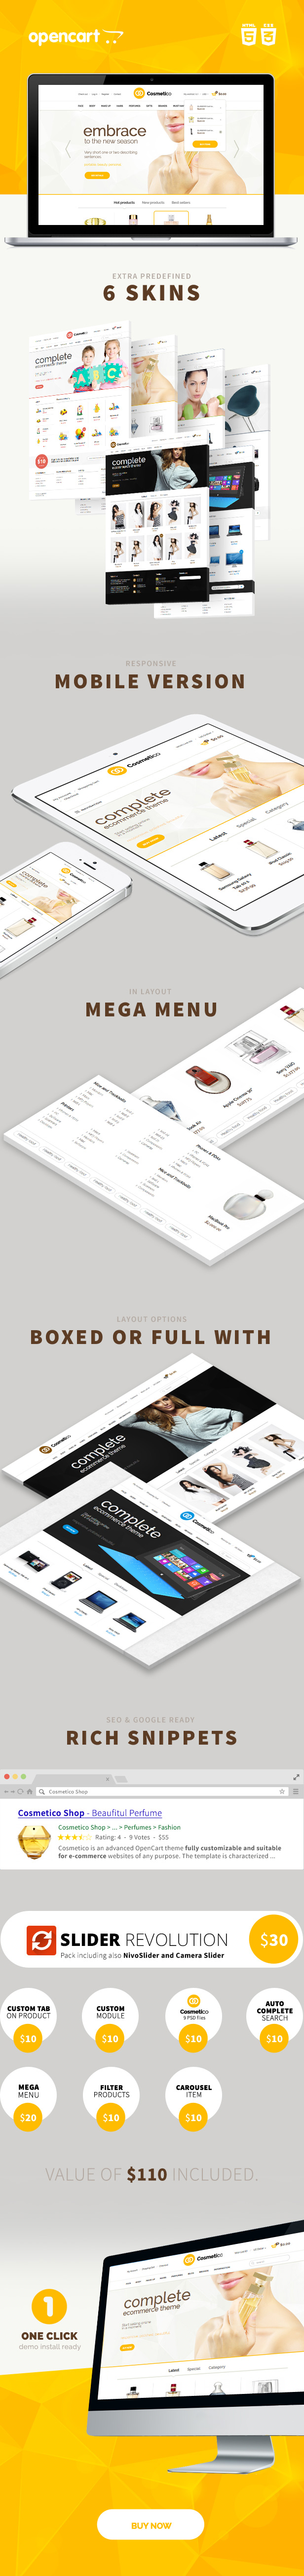 Cosmetico - Responsive OpenCart Template - 1